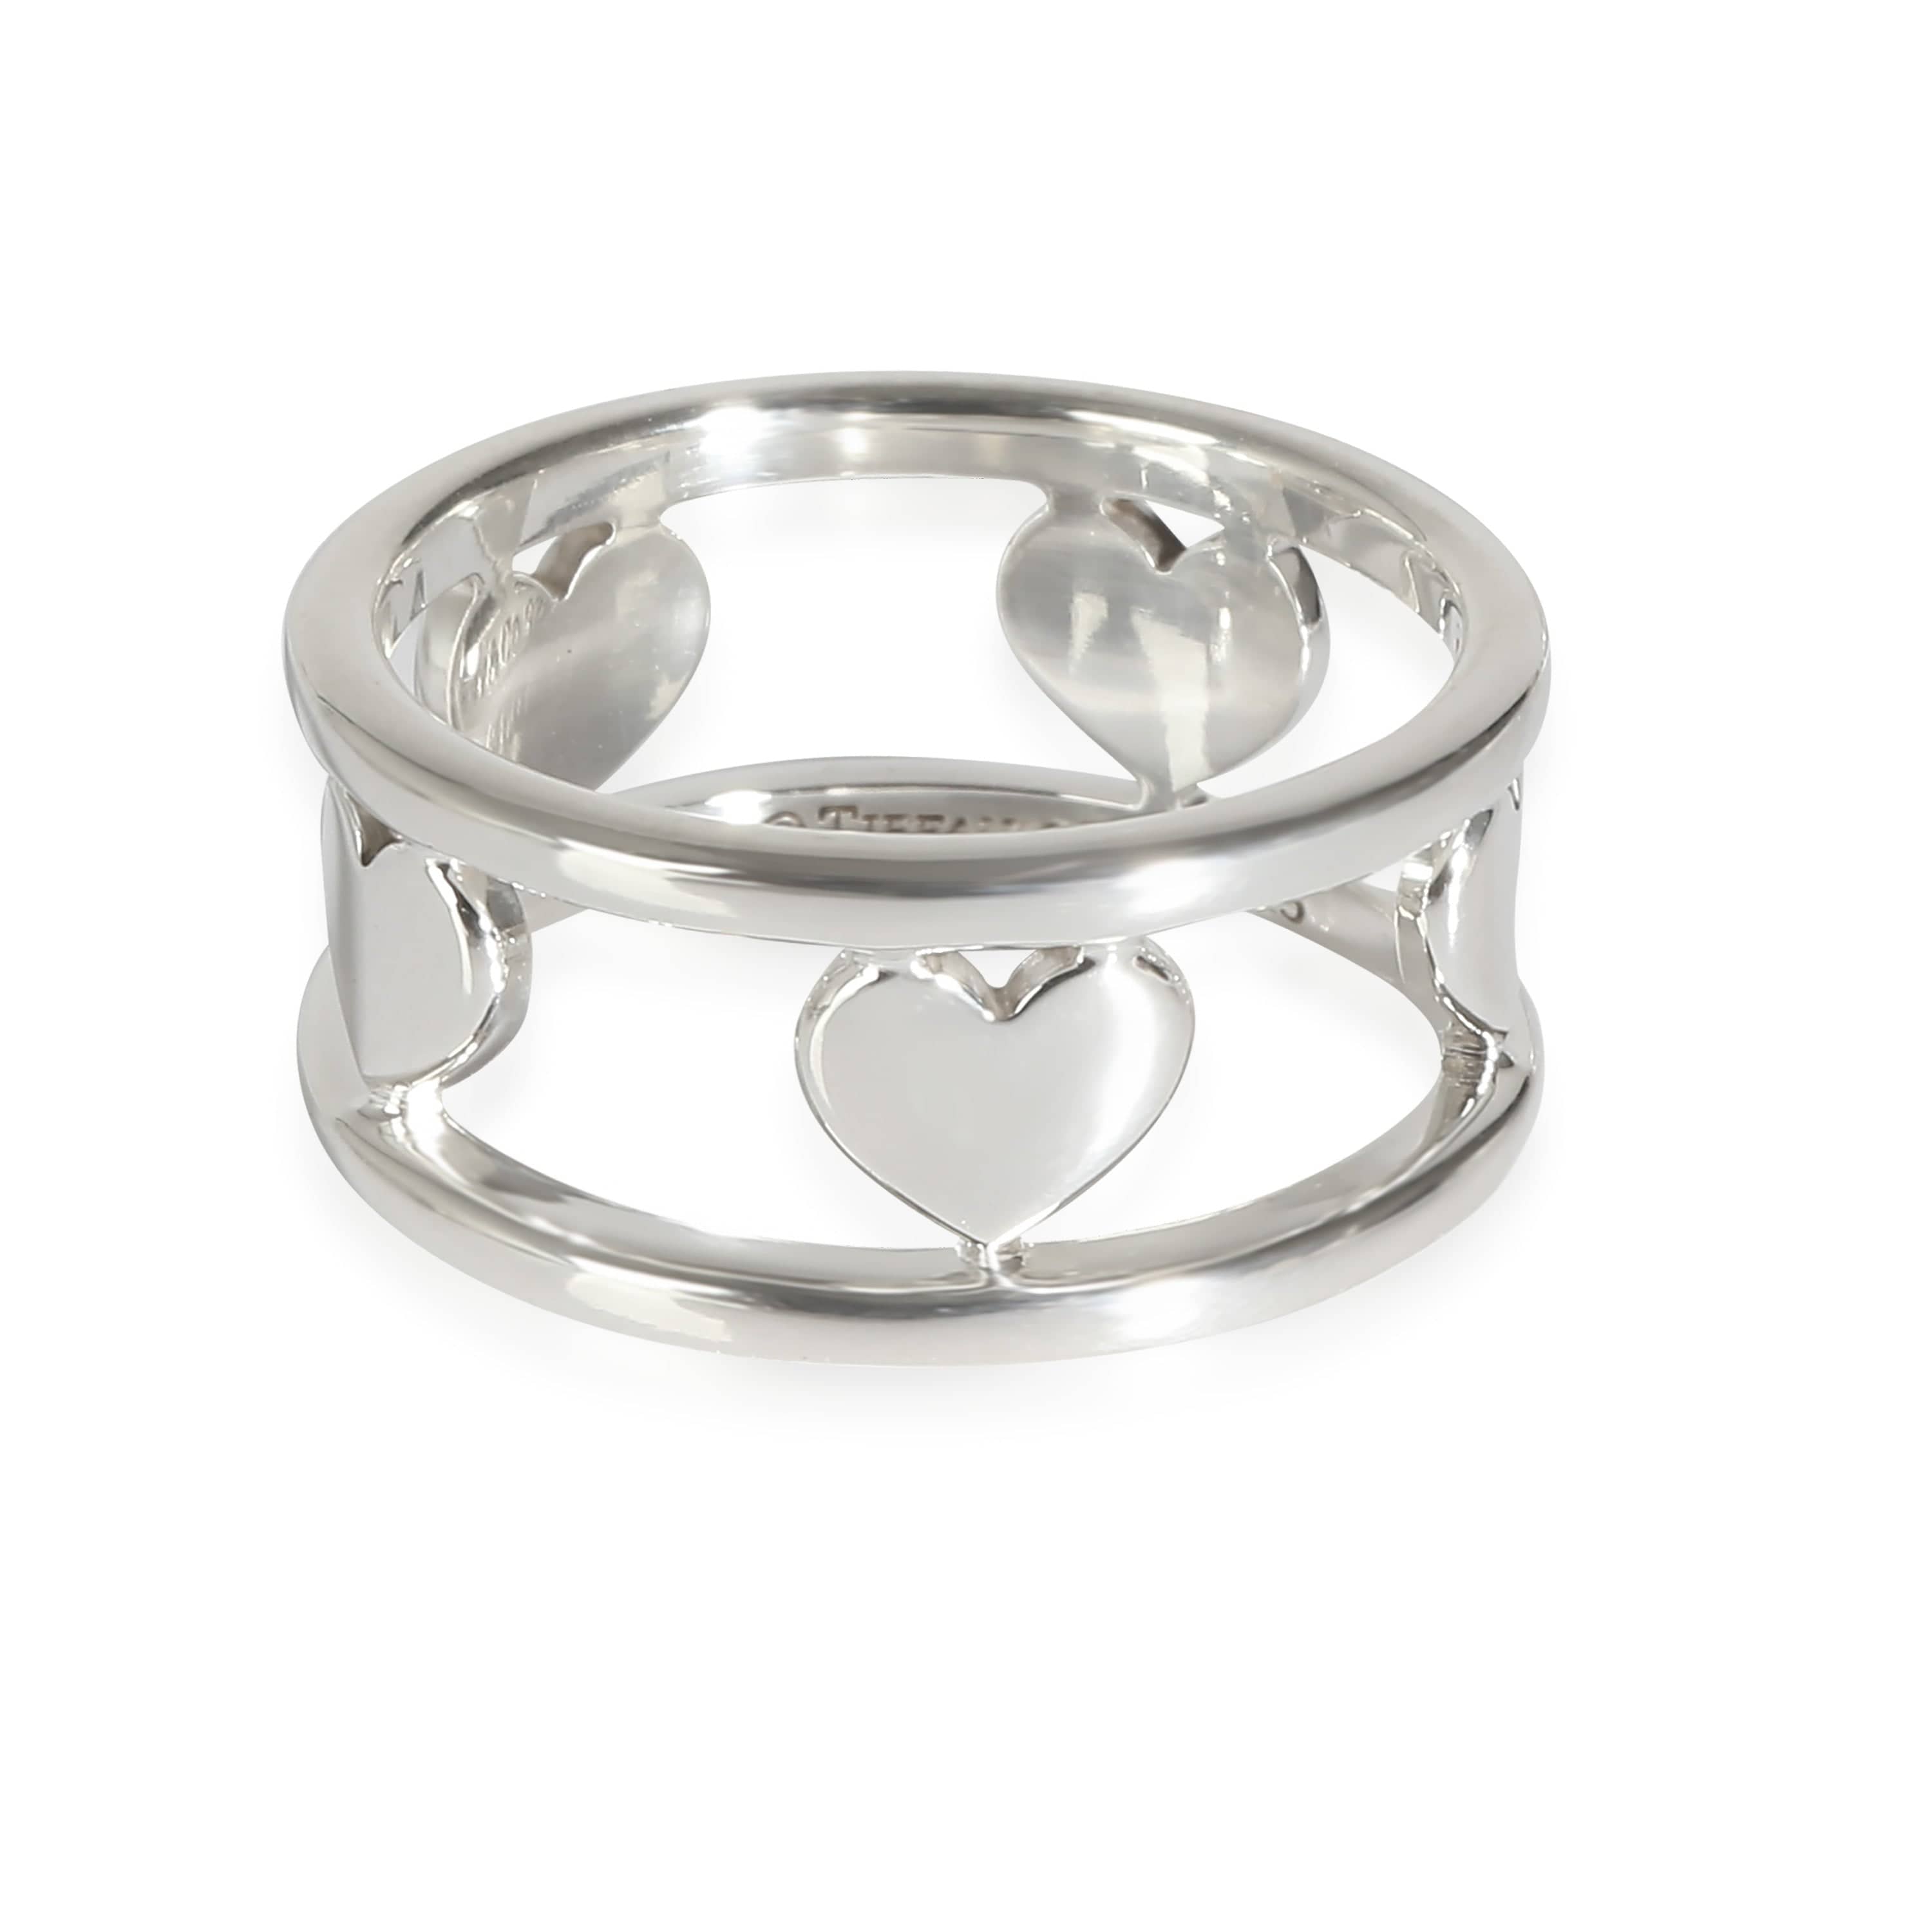 Tiffany & Co. Tiffany & Co. Cutout Heart Ring in  Sterling Silver